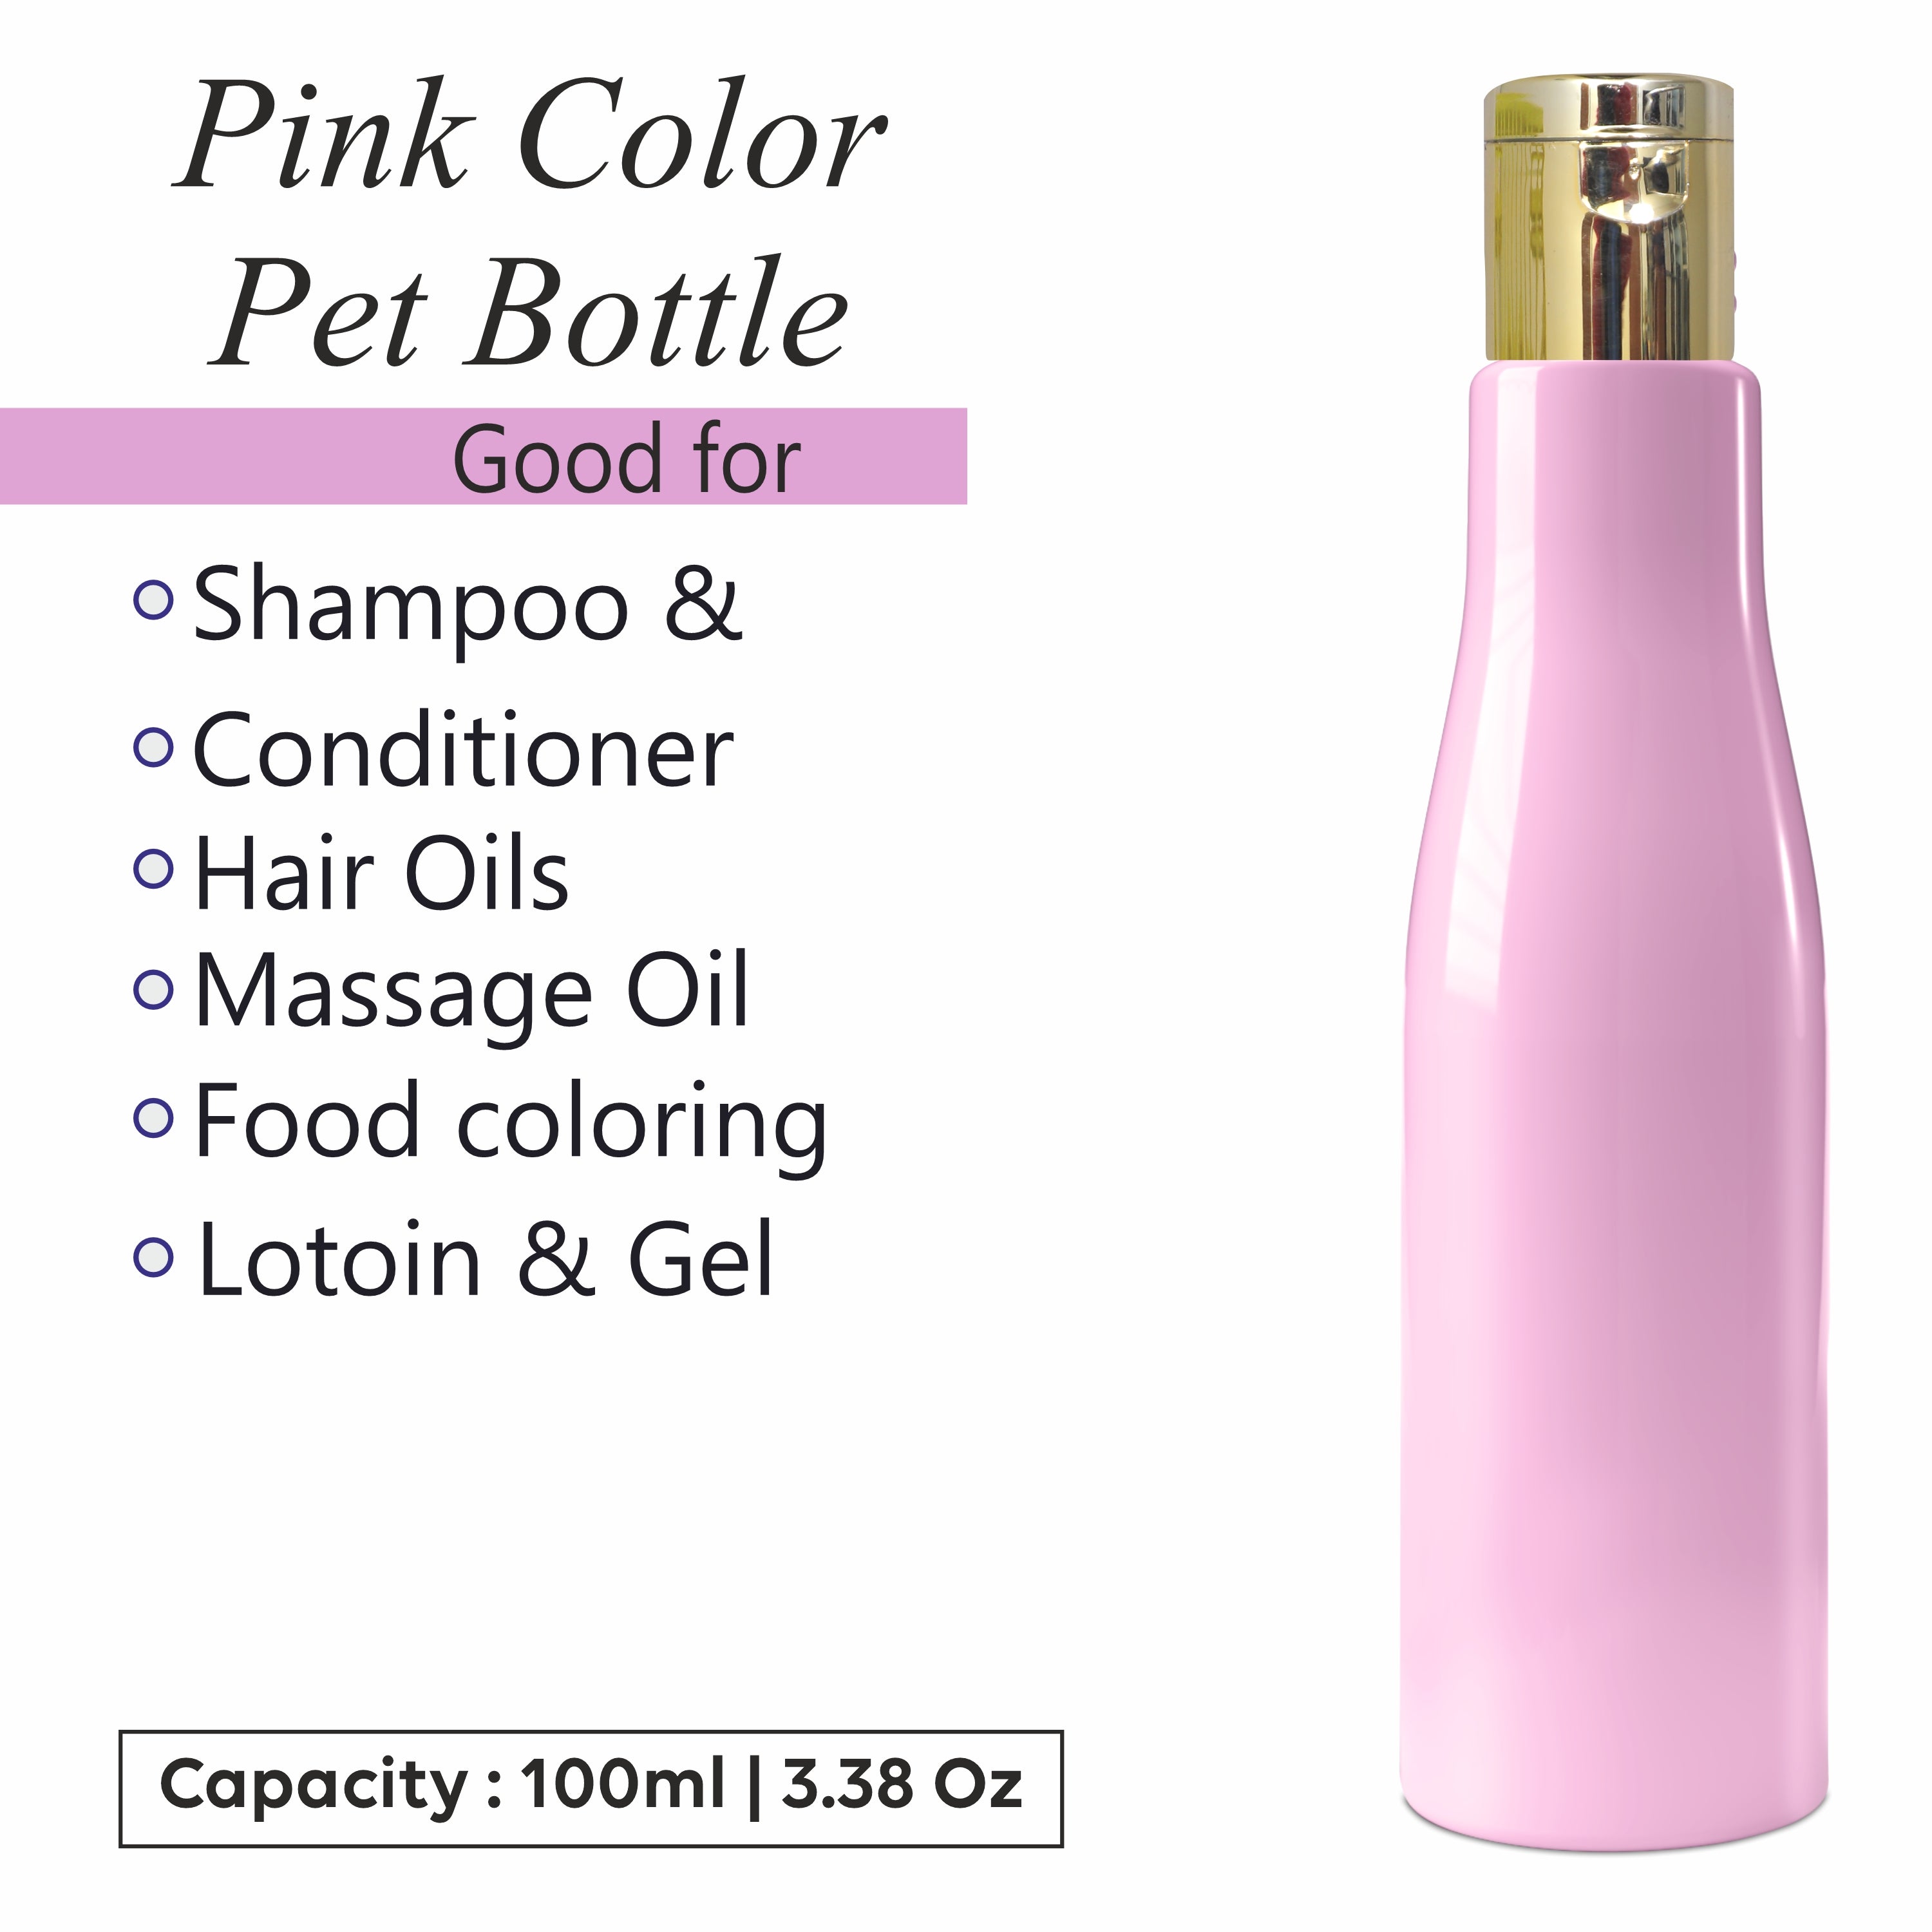 |ZMP07| LIGHT PINK ASTA PET BOTTLE WITH GHOLD PLATED FLIPTOP CAP Available Size: 100ml